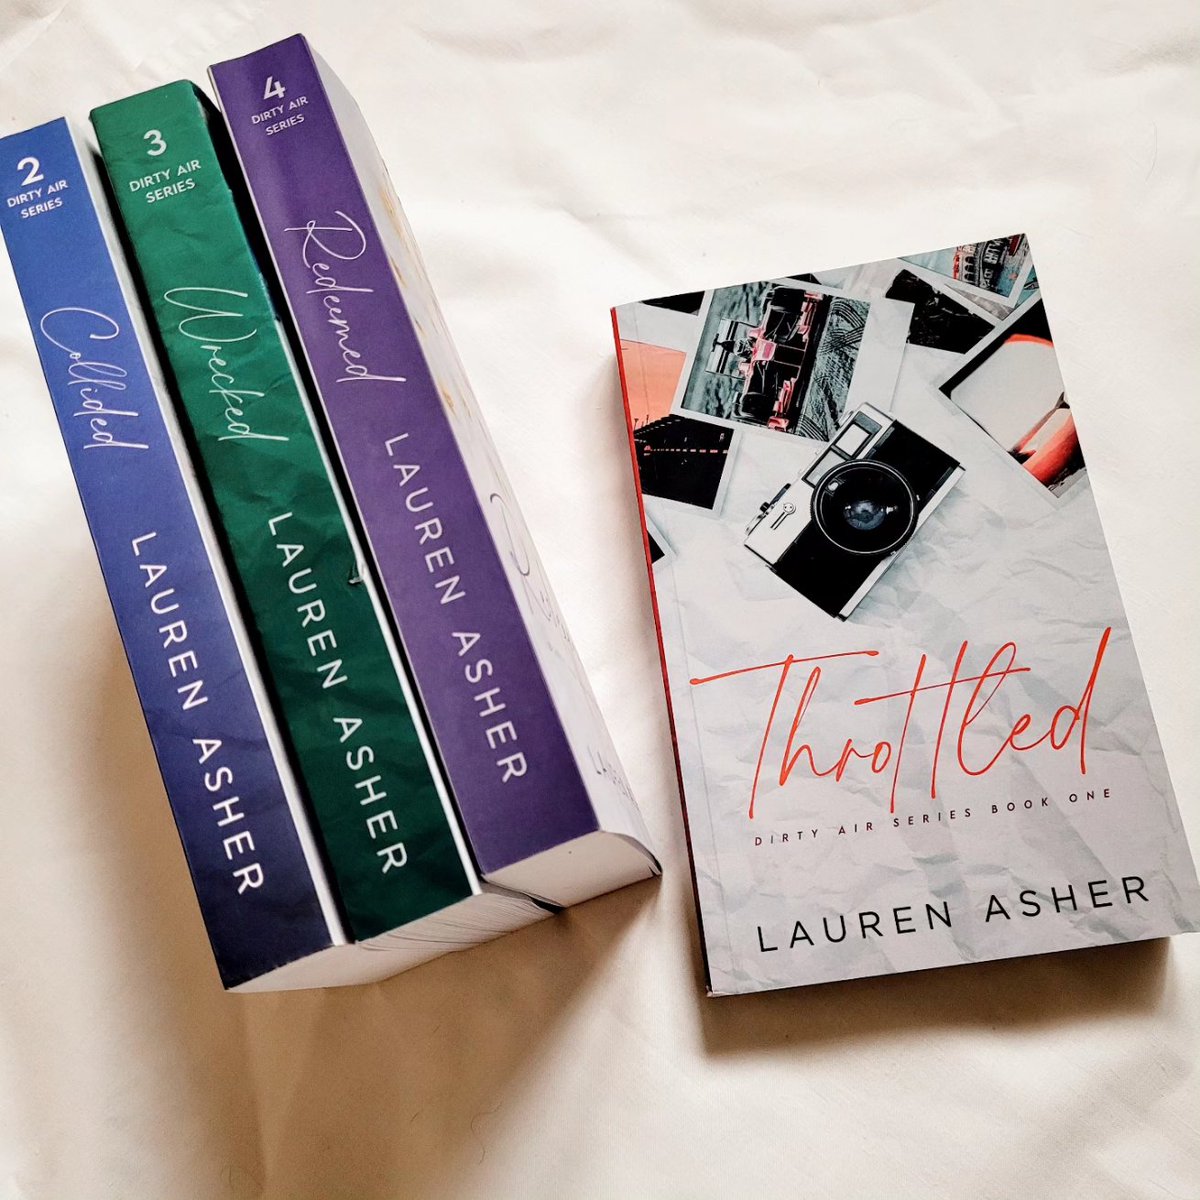 New #BookReview is up for Throttled by Lauren Asher Dual POV Formula One / forbidden / brothers rival romance. #Throttled #bookstagrammer #BookTwitter